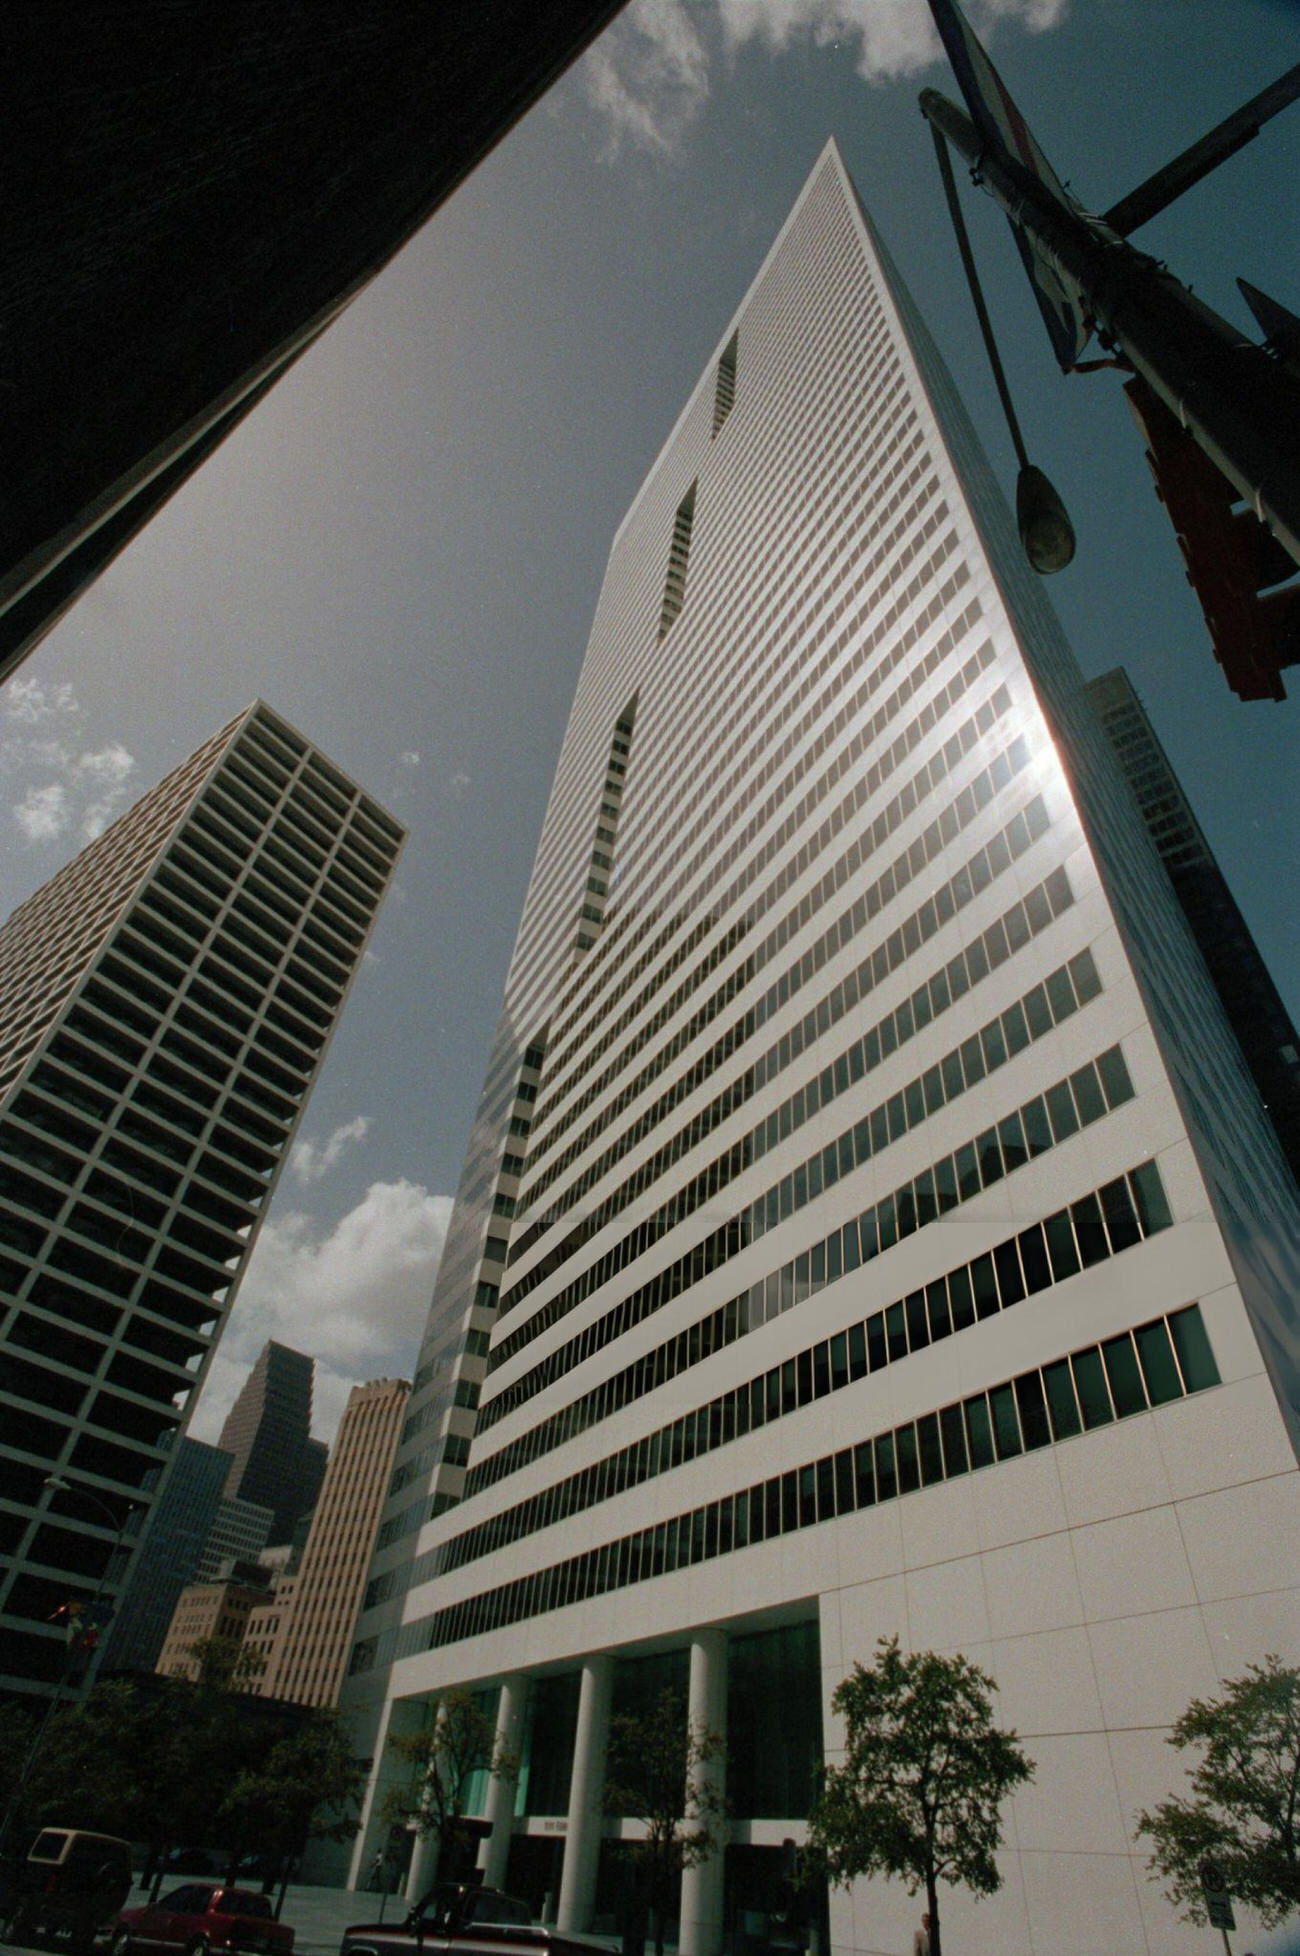 First City Tower's feature on July 1, 1993, emphasizes the architectural and commercial growth of downtown Houston, housing 1.3 million square feet of office space, Texas.